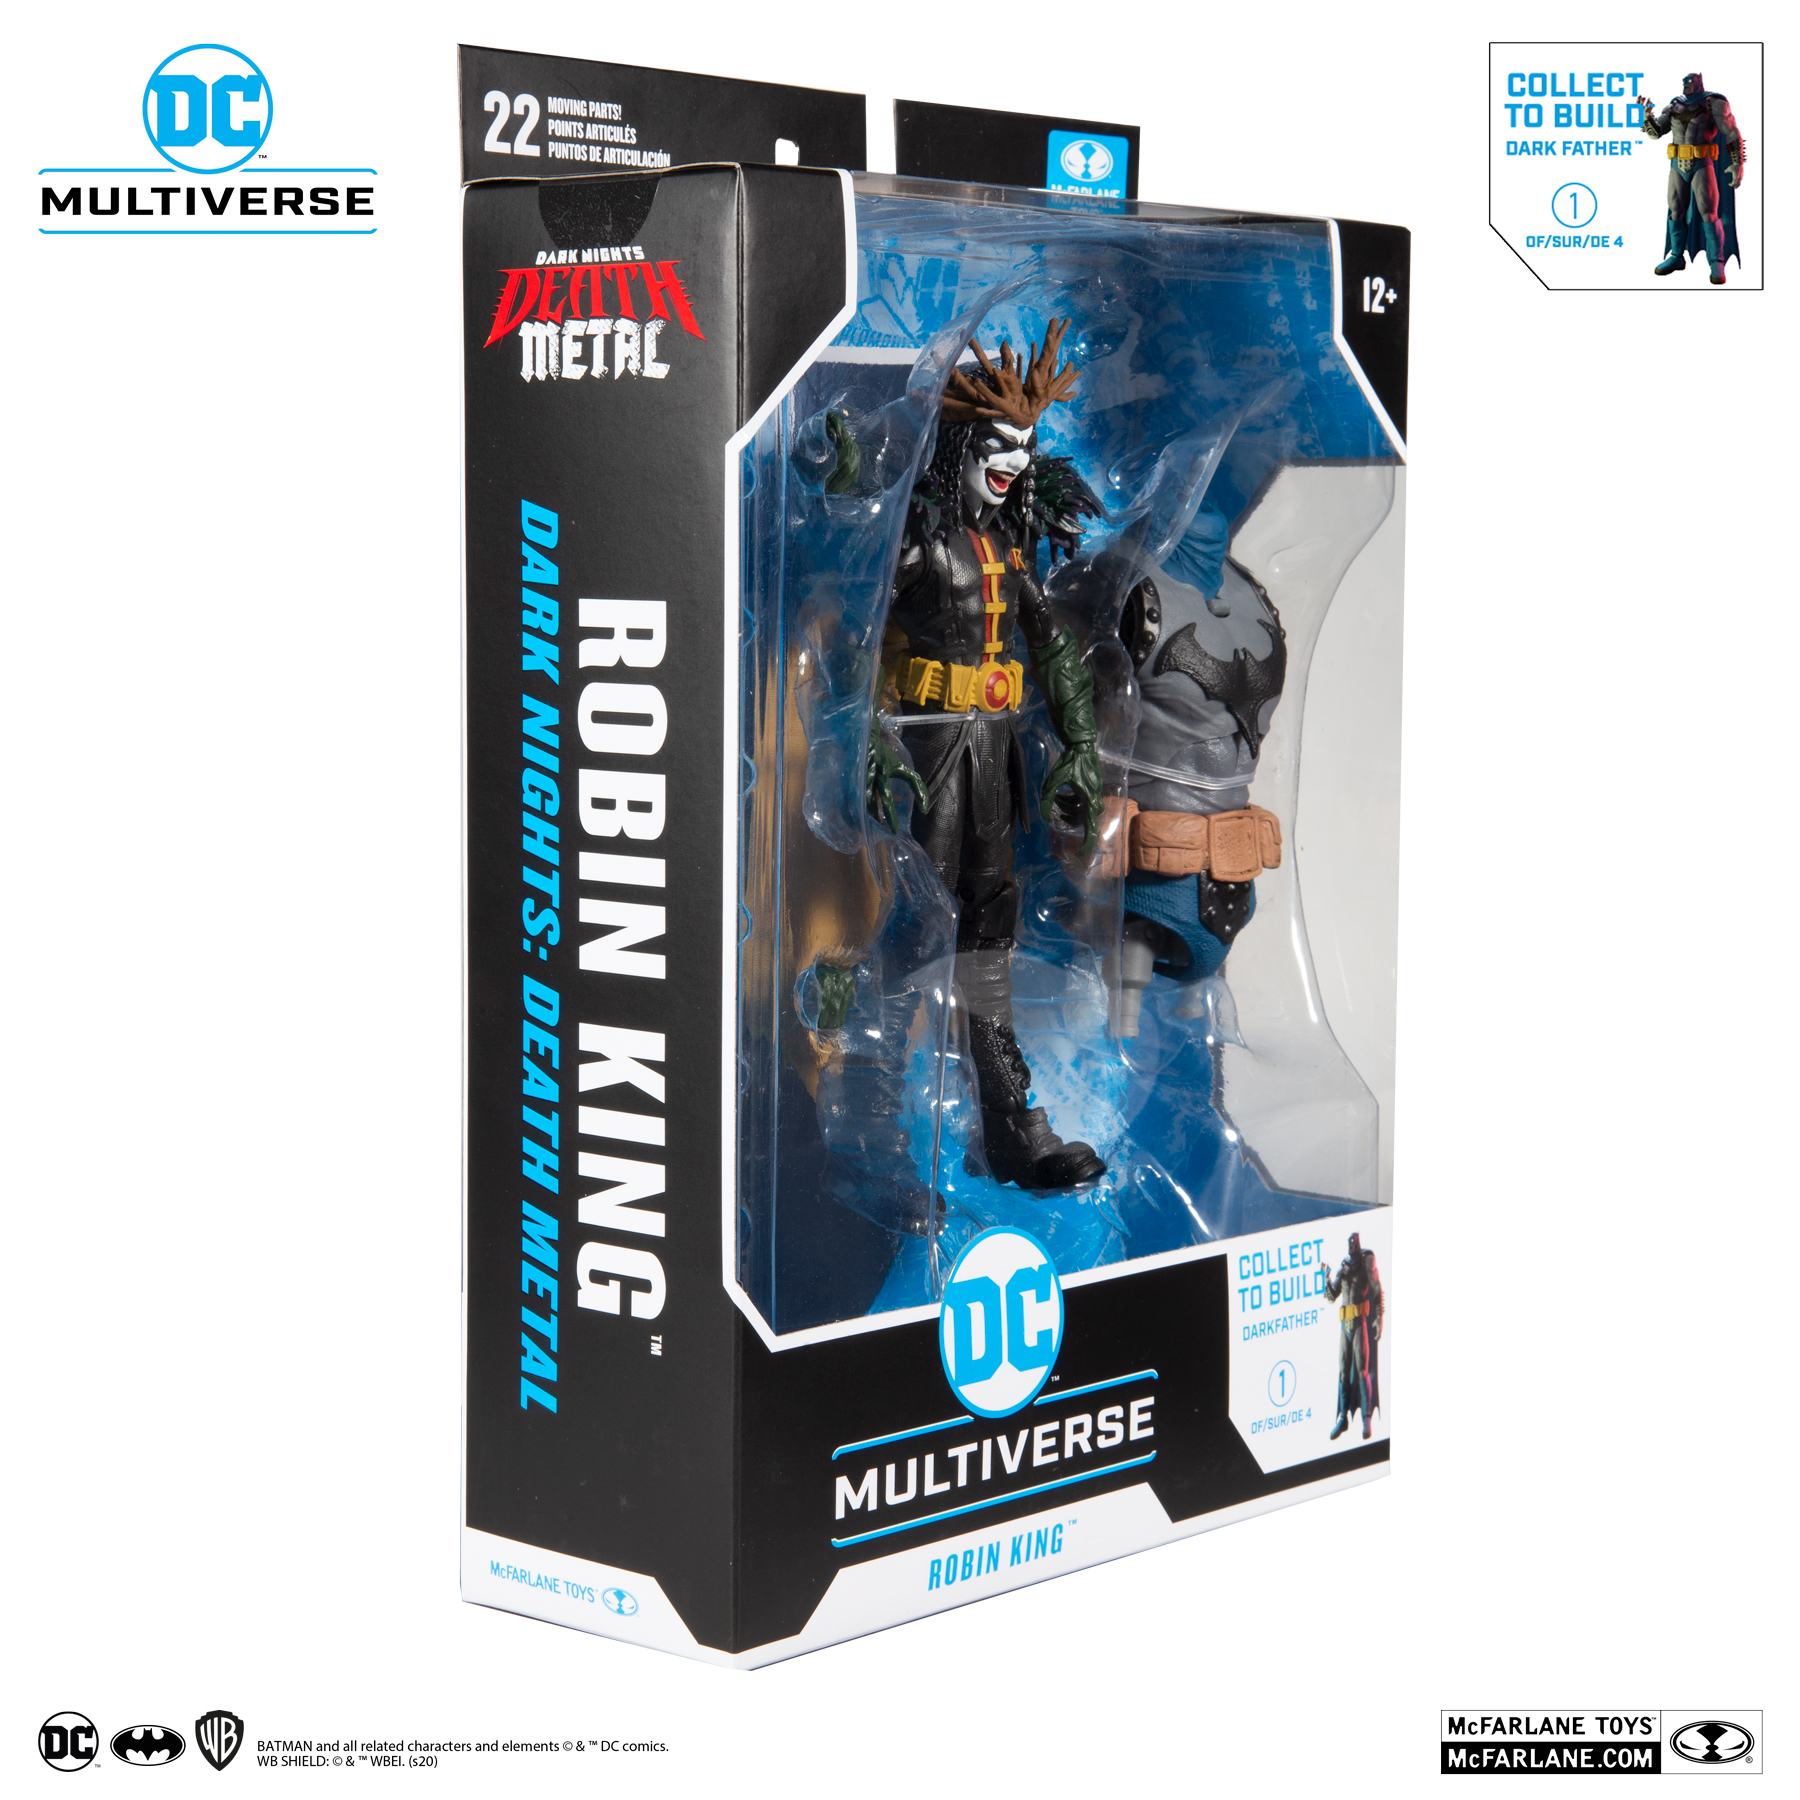 Death Metal Robin King 7 Action Figure with Build-A ‘Darkfather’ Parts and Accessories DC Multiverse Dark Nights